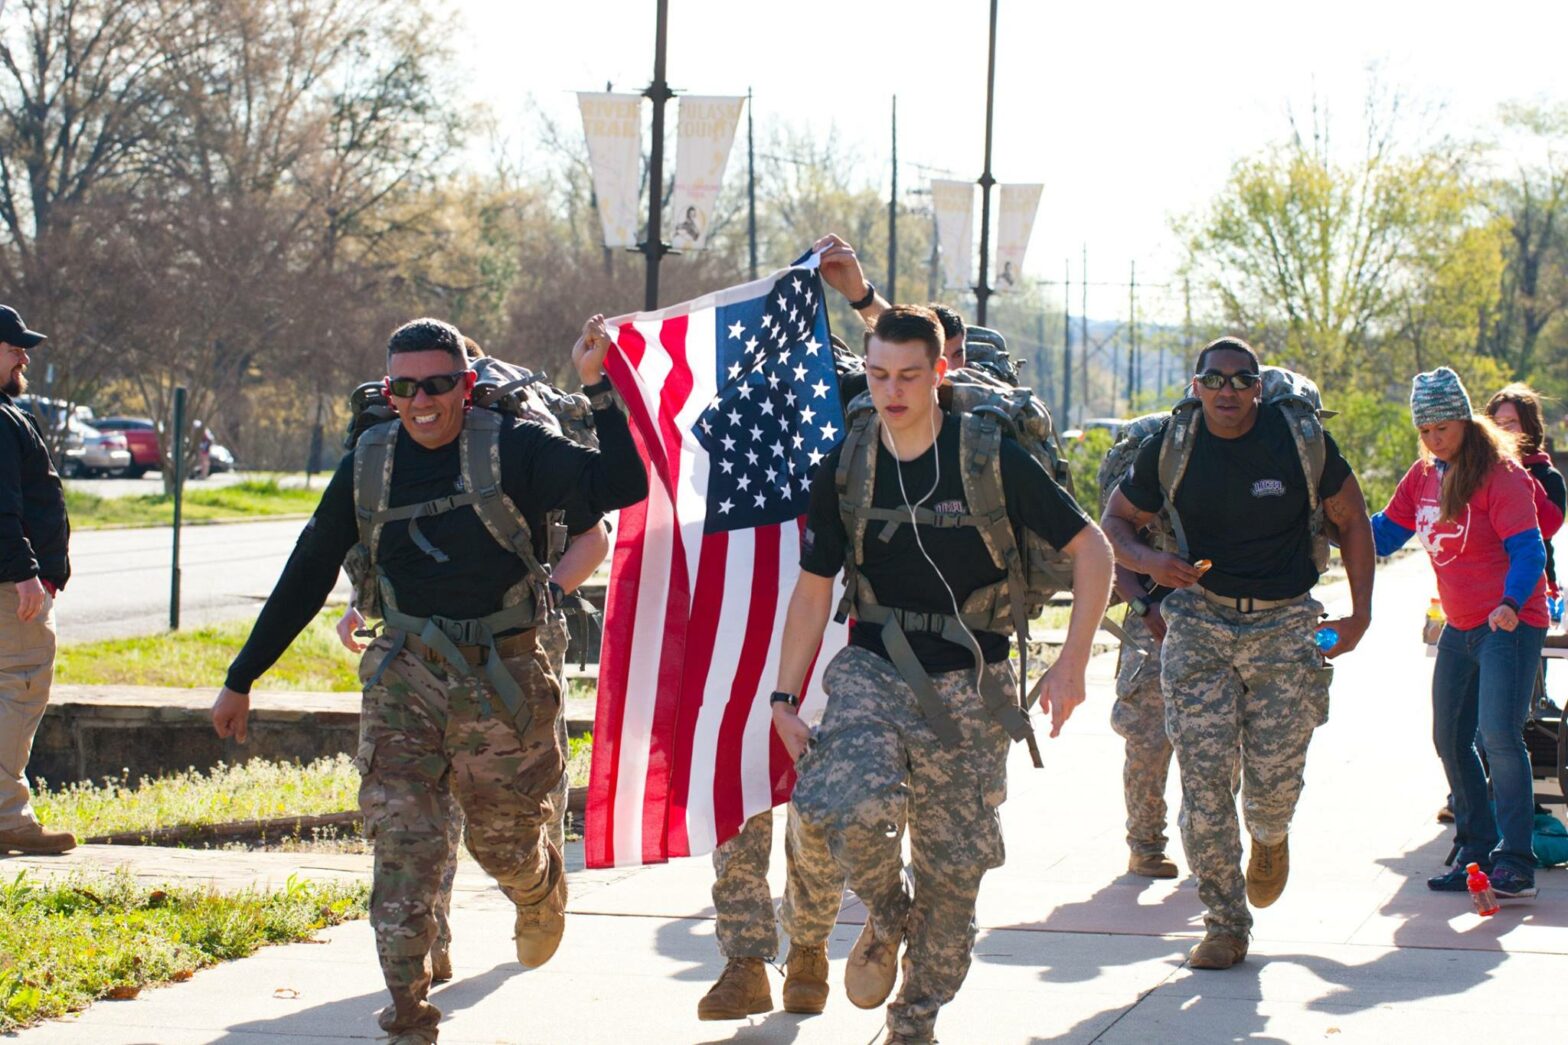 3rd Annual Heroes Ruck Challenge a Huge Success!